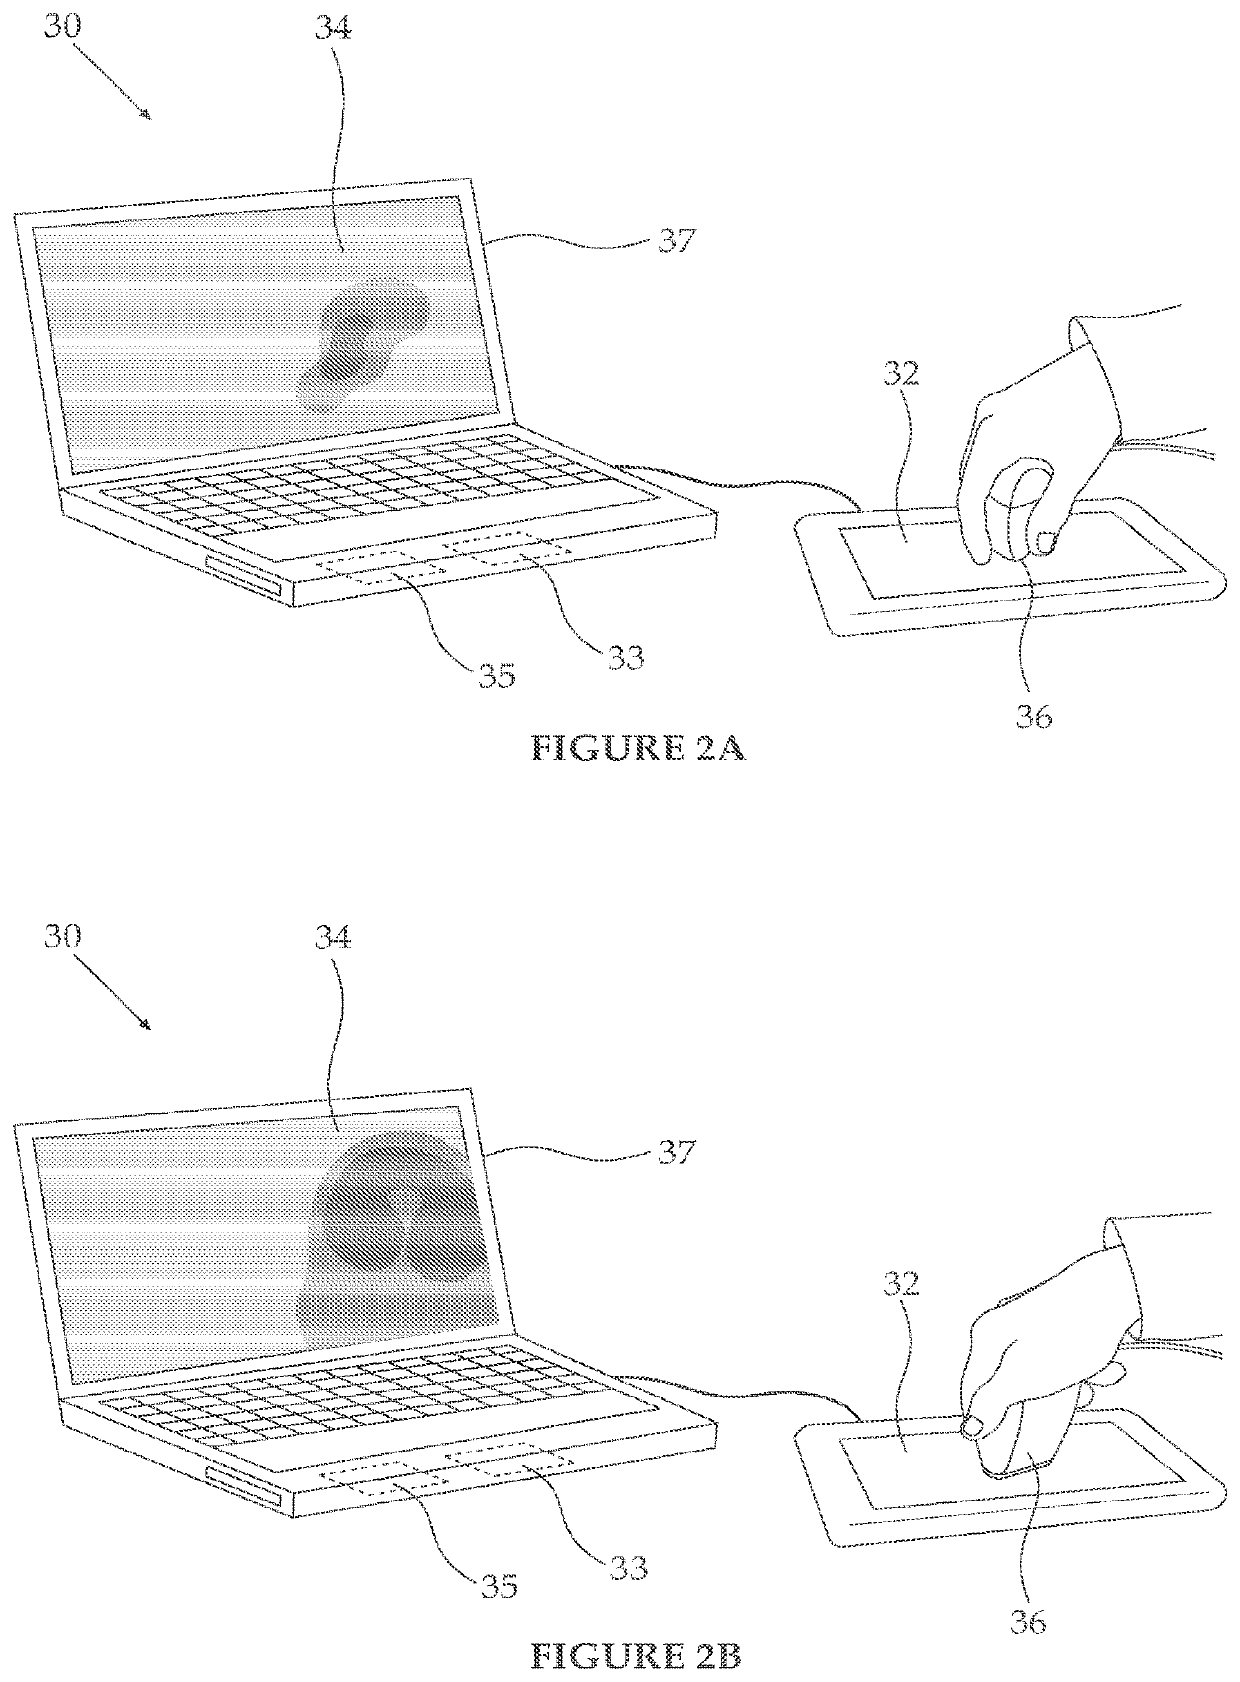 Device for training users of an ultrasound imaging device